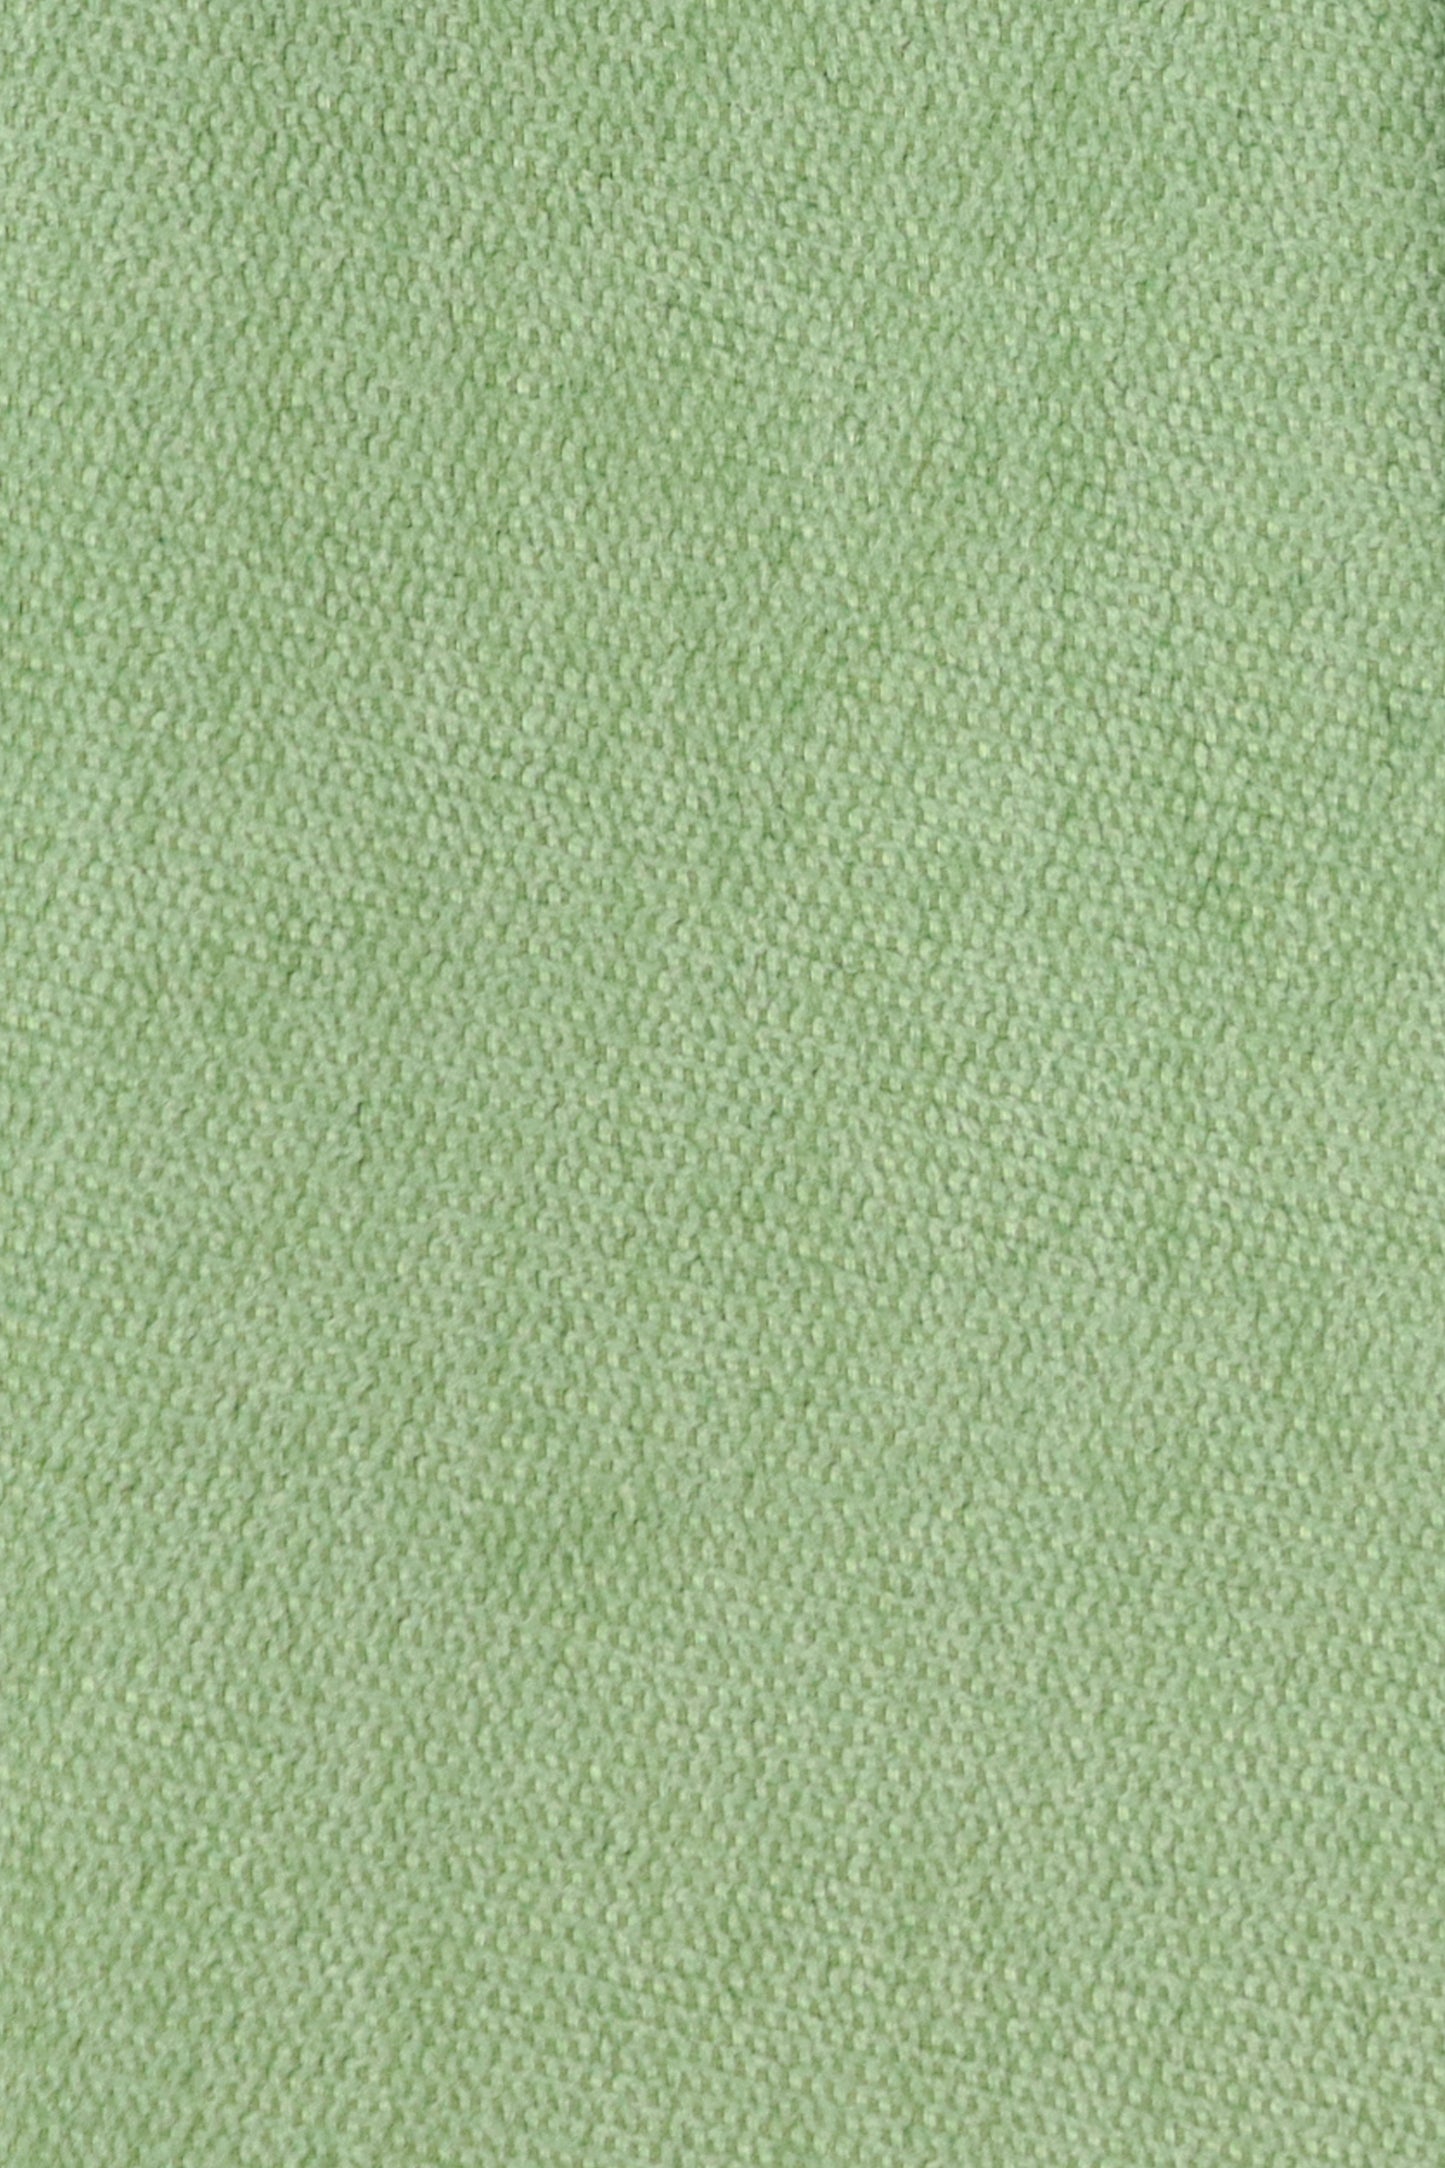 100% Brushed Cotton Suede Tie - Green